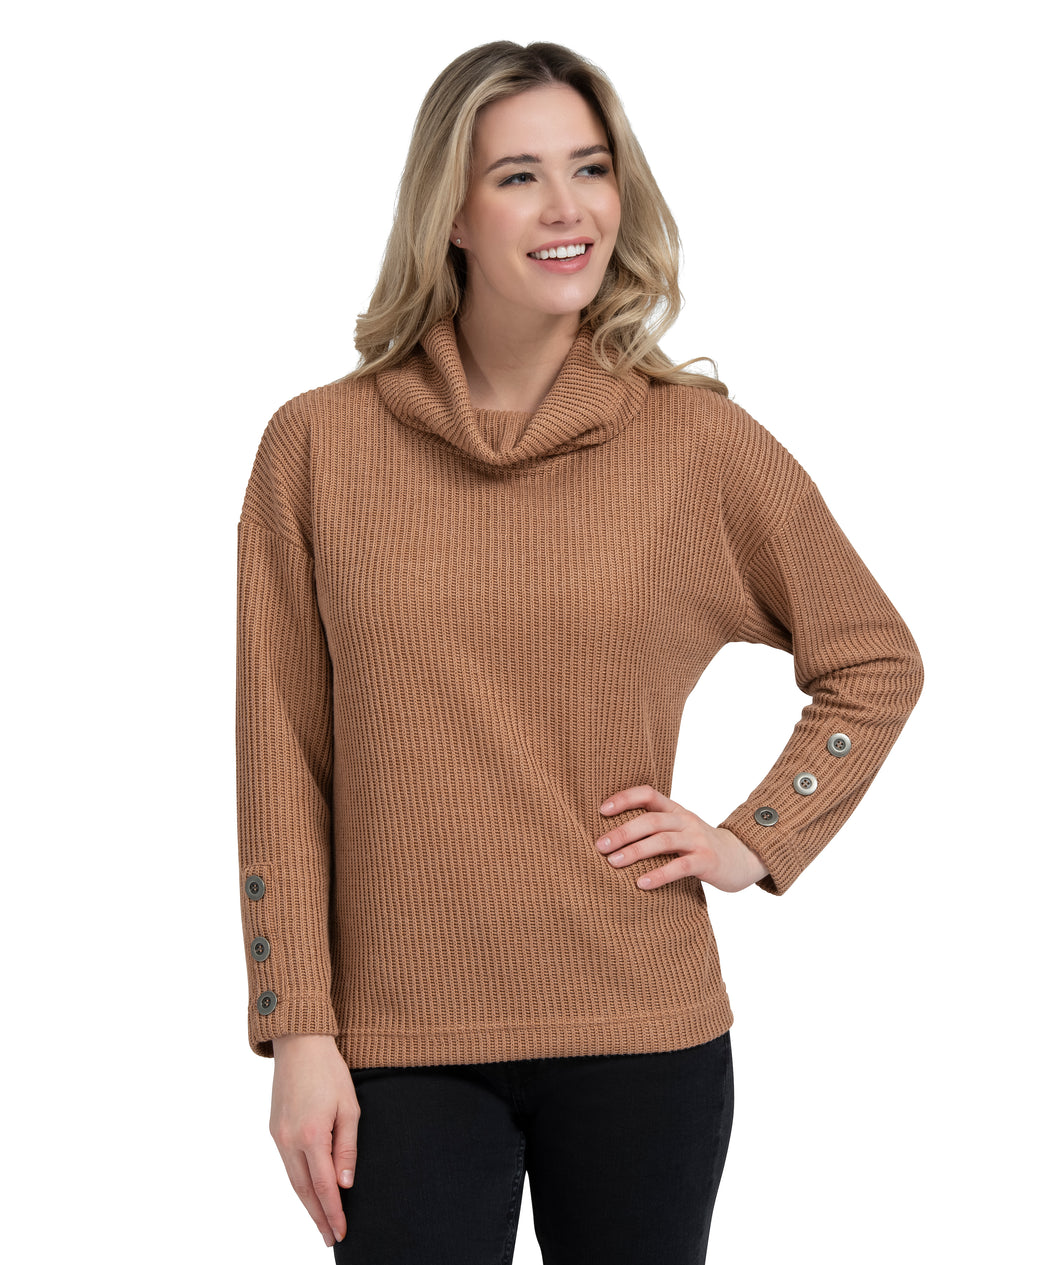 Its Simpli Zen Warm Hug Sweater with Cowl Neck and Button Detail